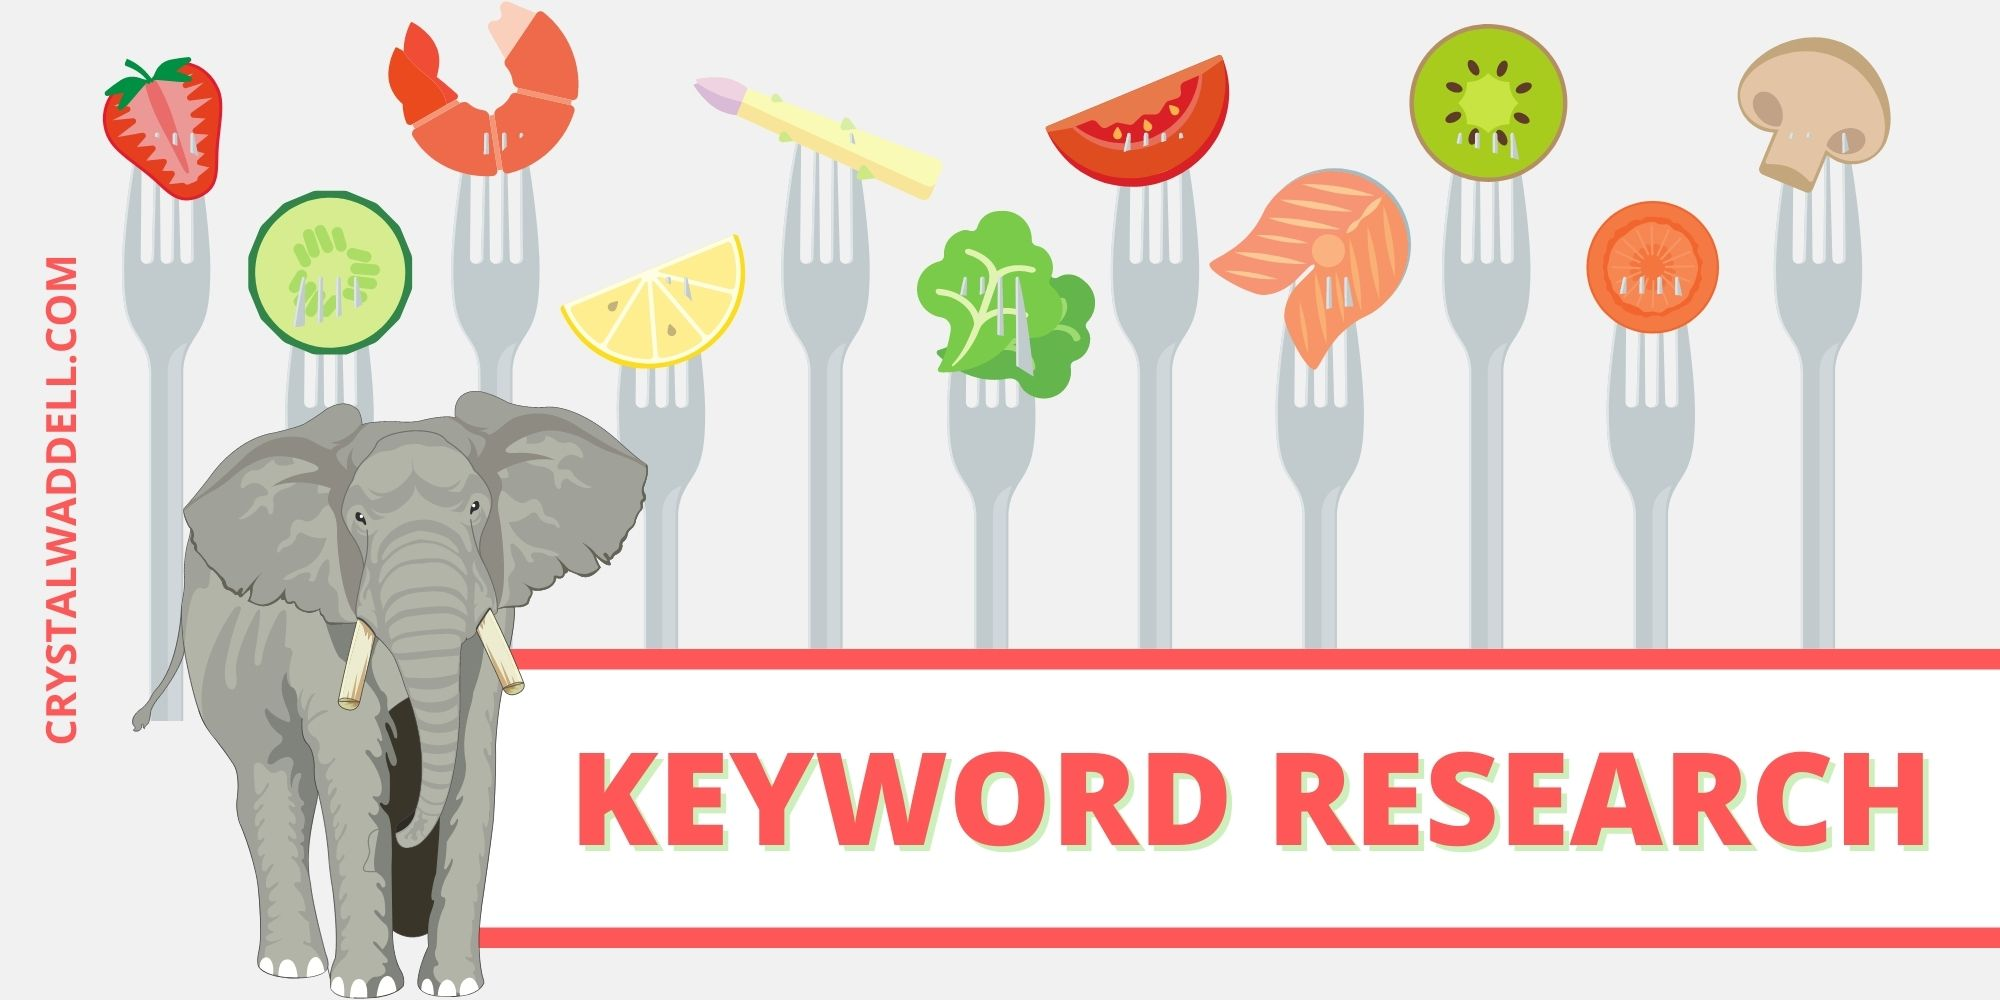 Keyword research is the "key" to showing up in relevant search results.